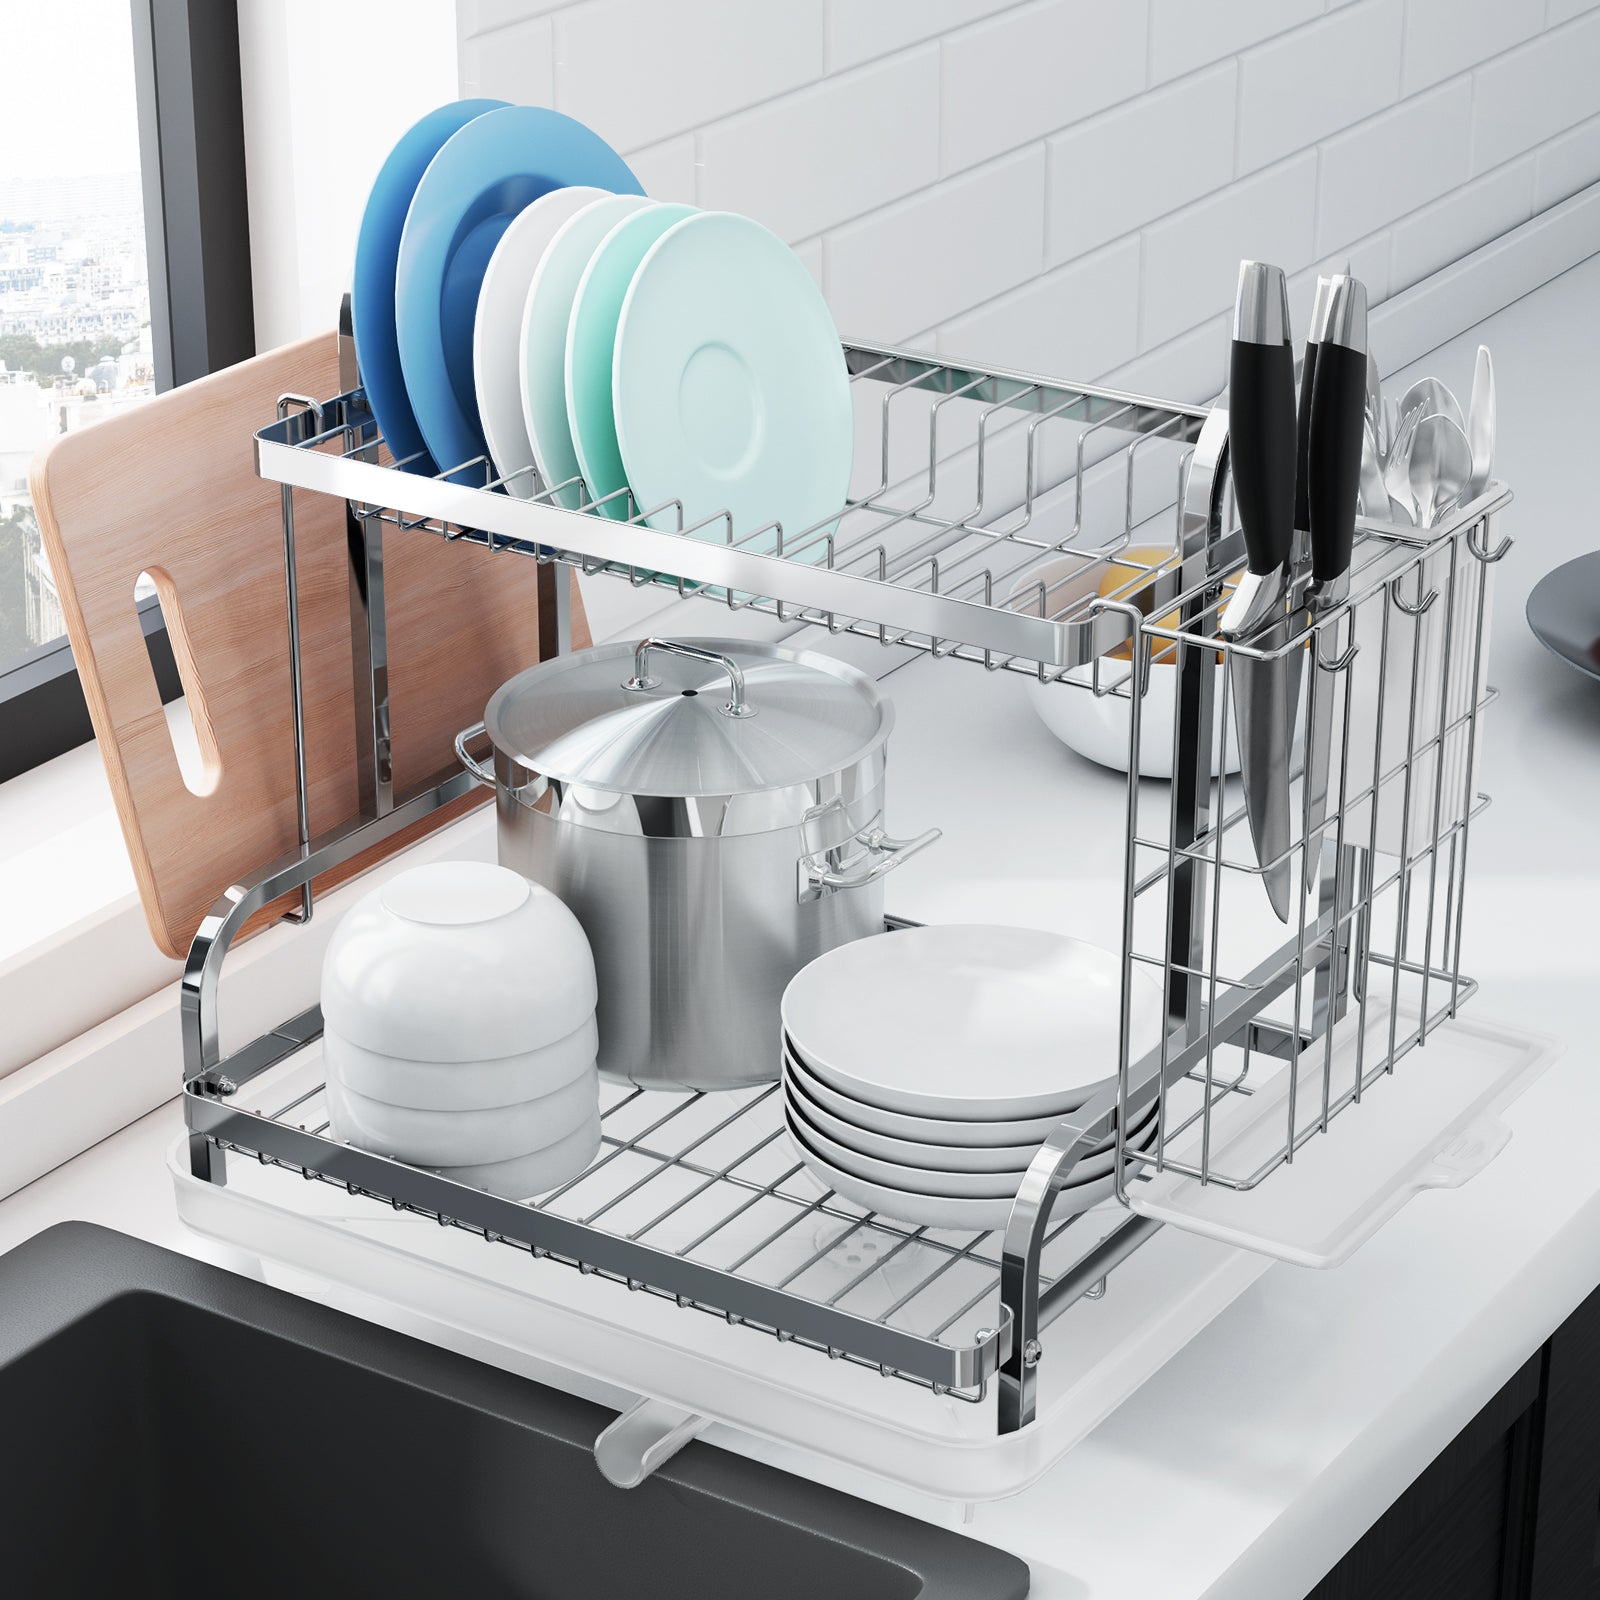 Kitsure Dish Drying Rack in Sink - Dual-Use for Countertops, Stainless  Steel Over The Sink for Kitchen Counter with a Draindboard & Utensil Holder